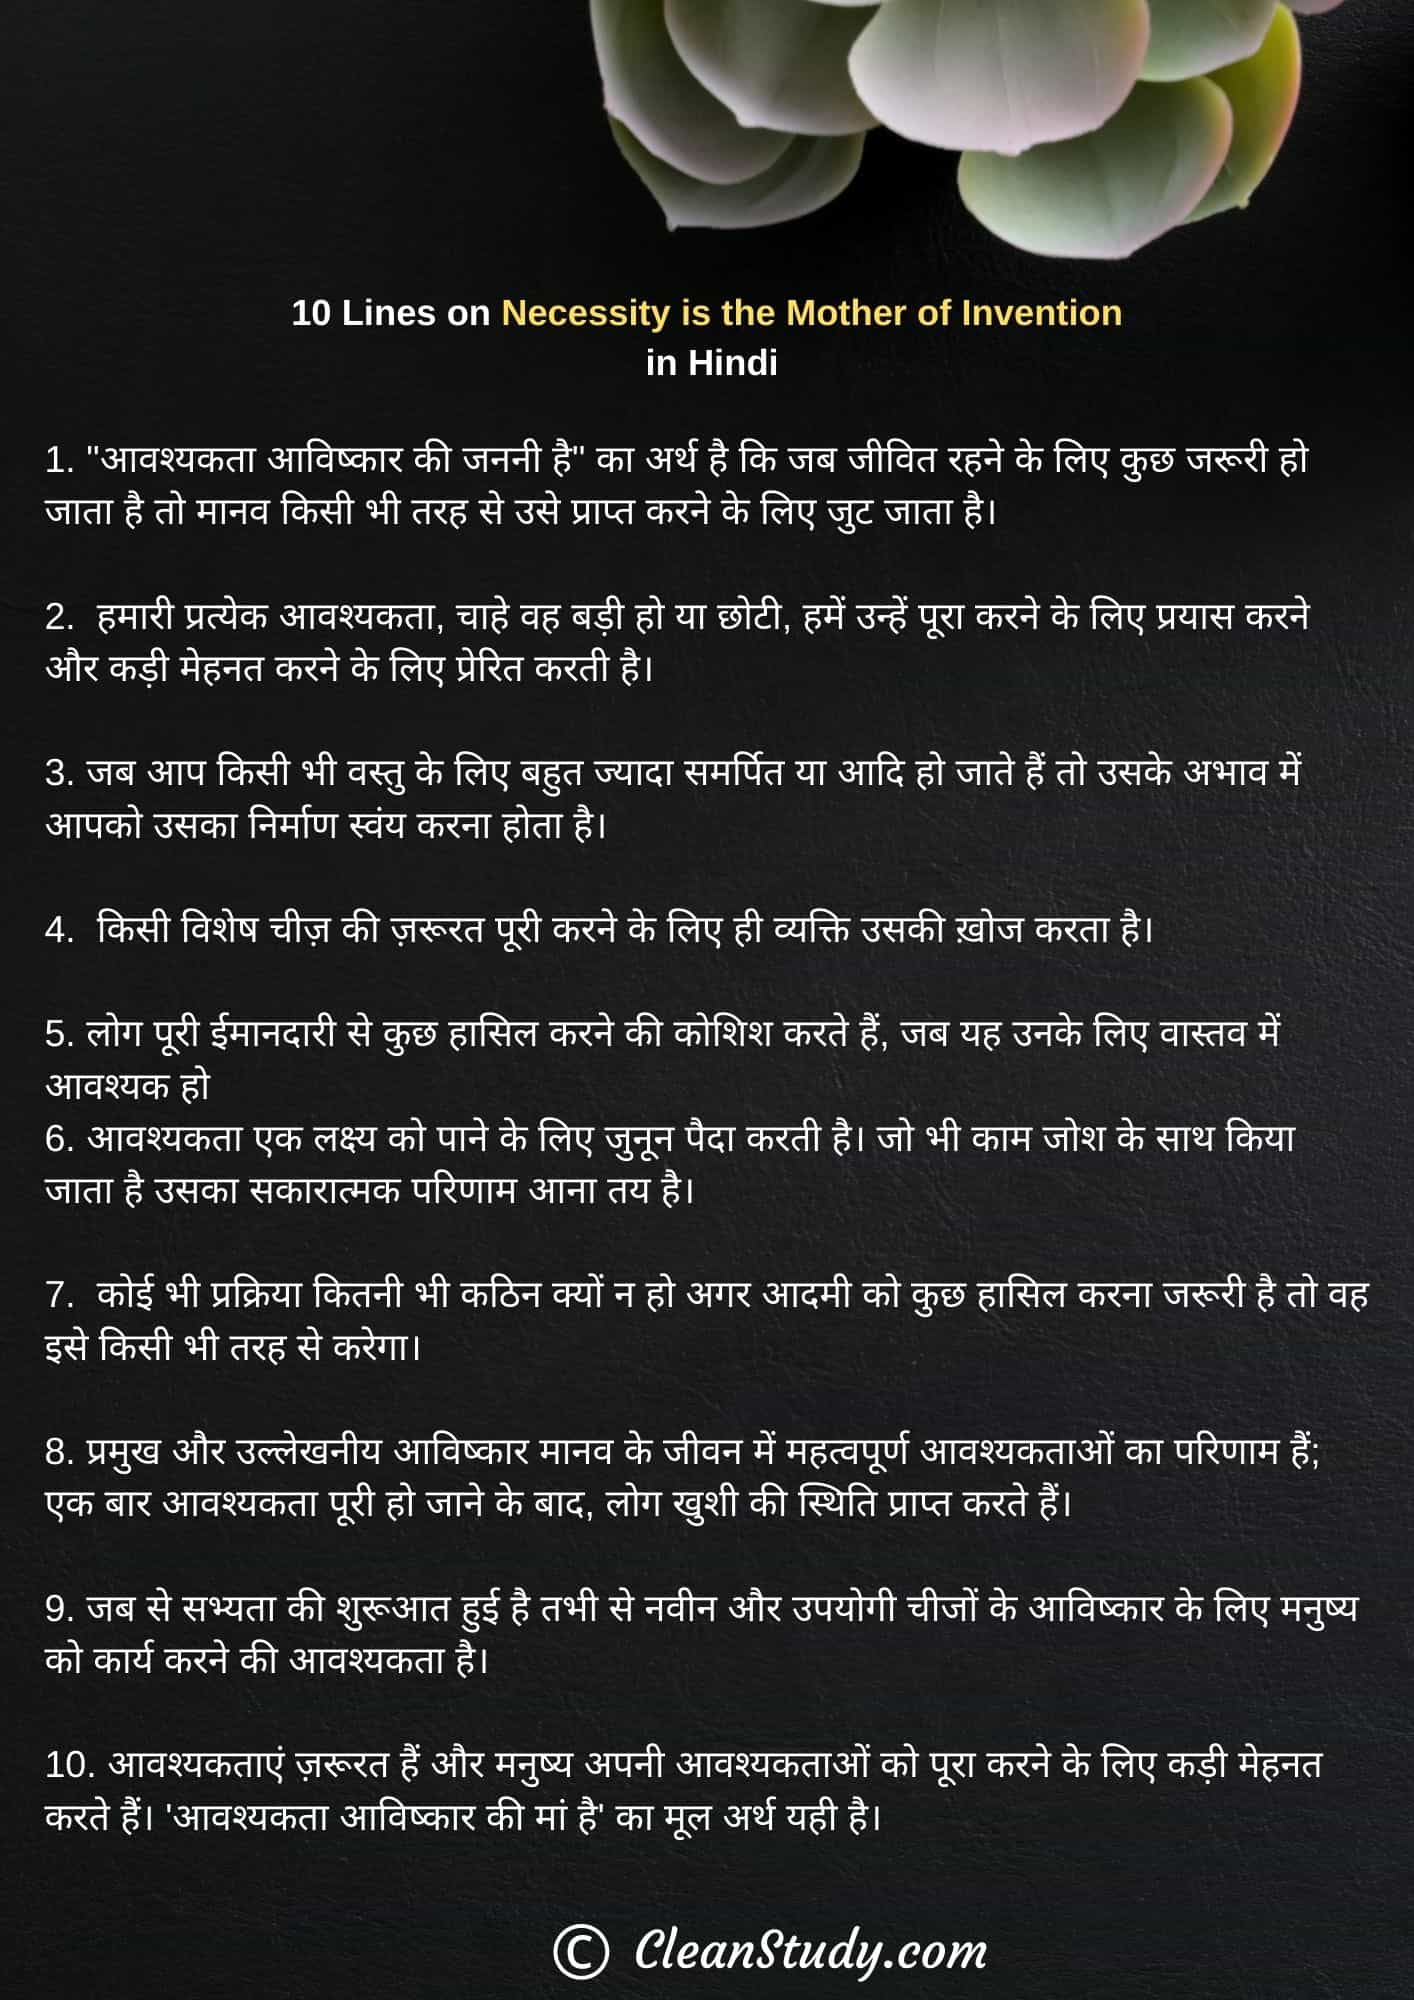  10 Lines on Necessity is the Mother of Invention in Hindi